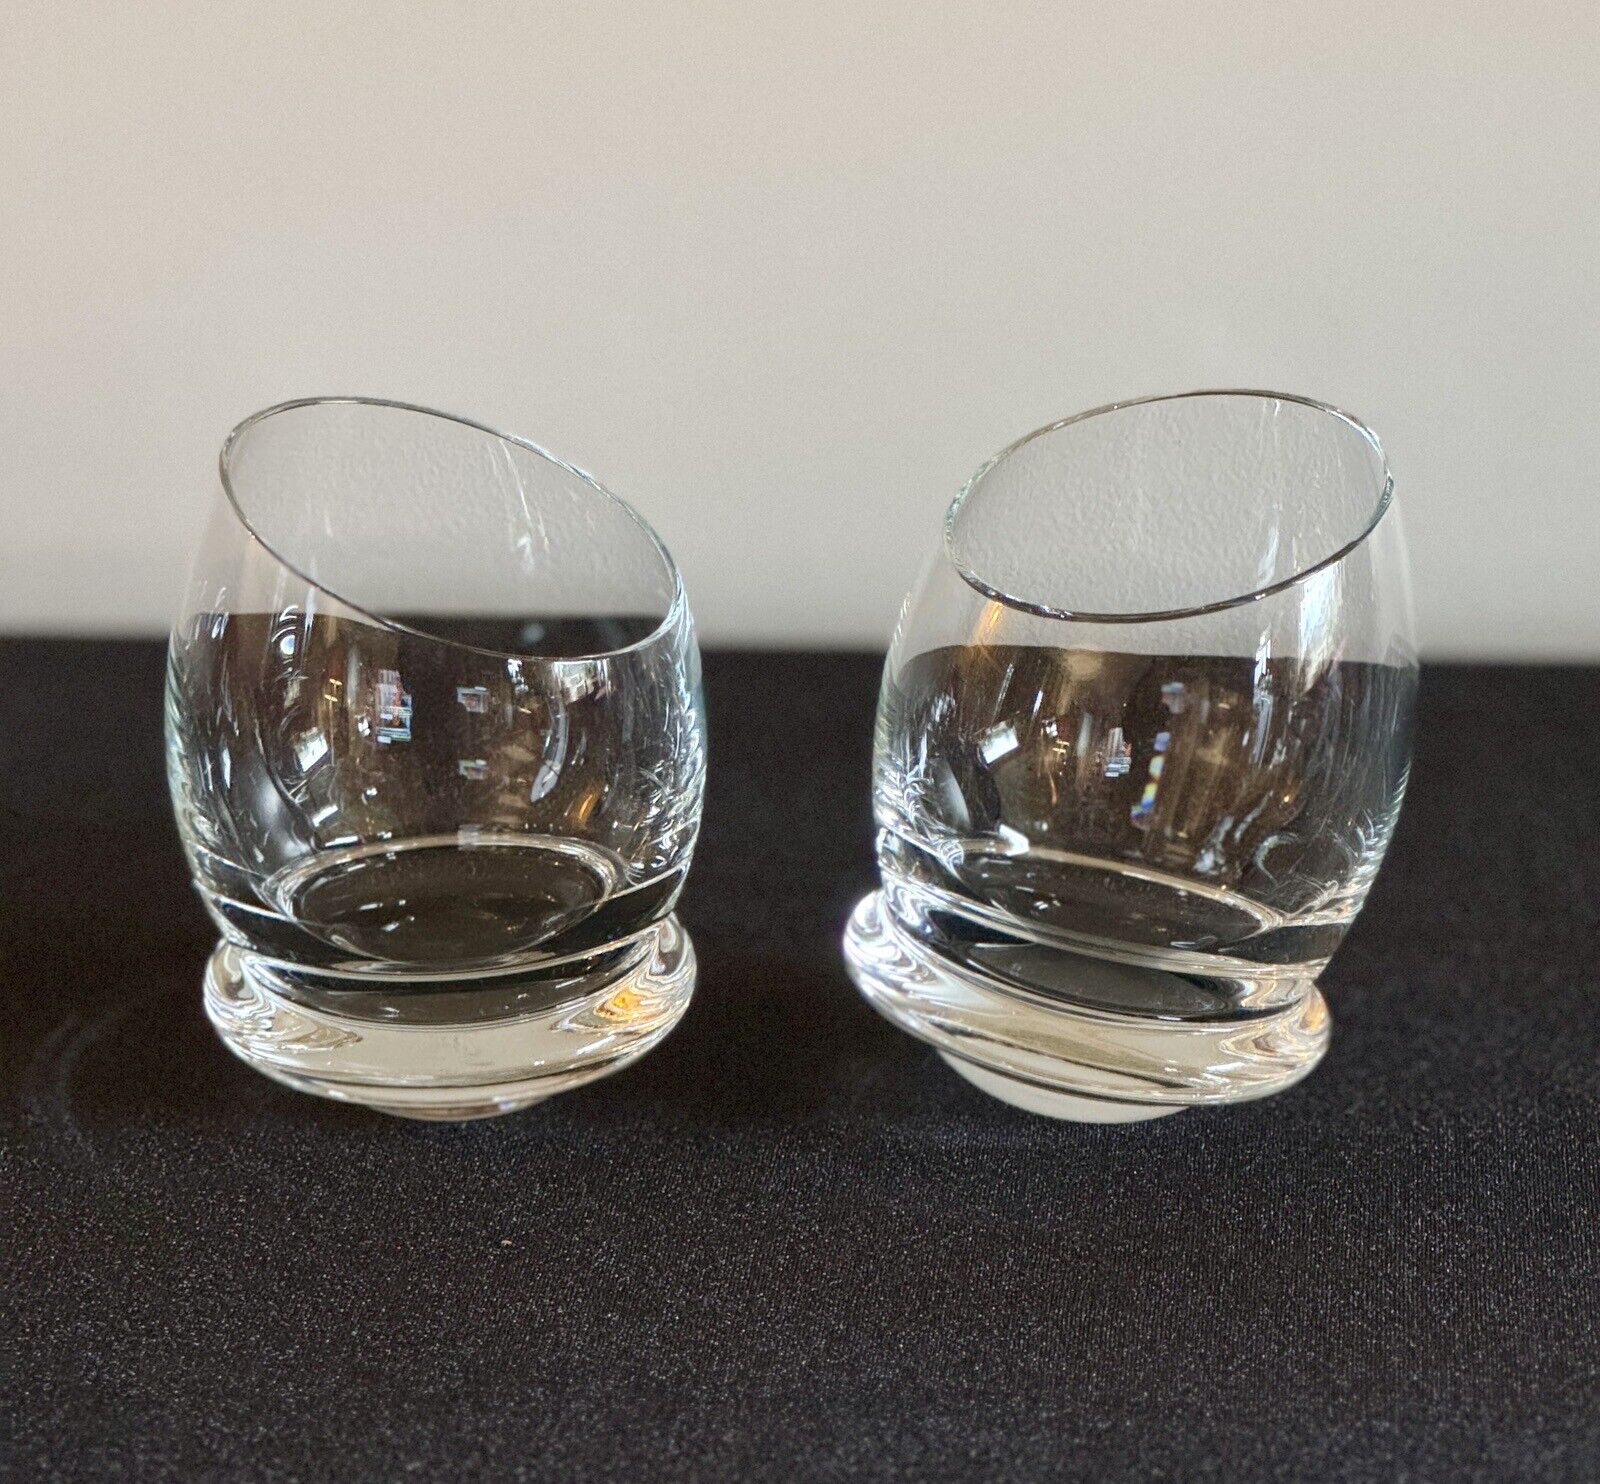 VTG Mid-Century MCM Crystal Roly Poly Schnapps Glasses